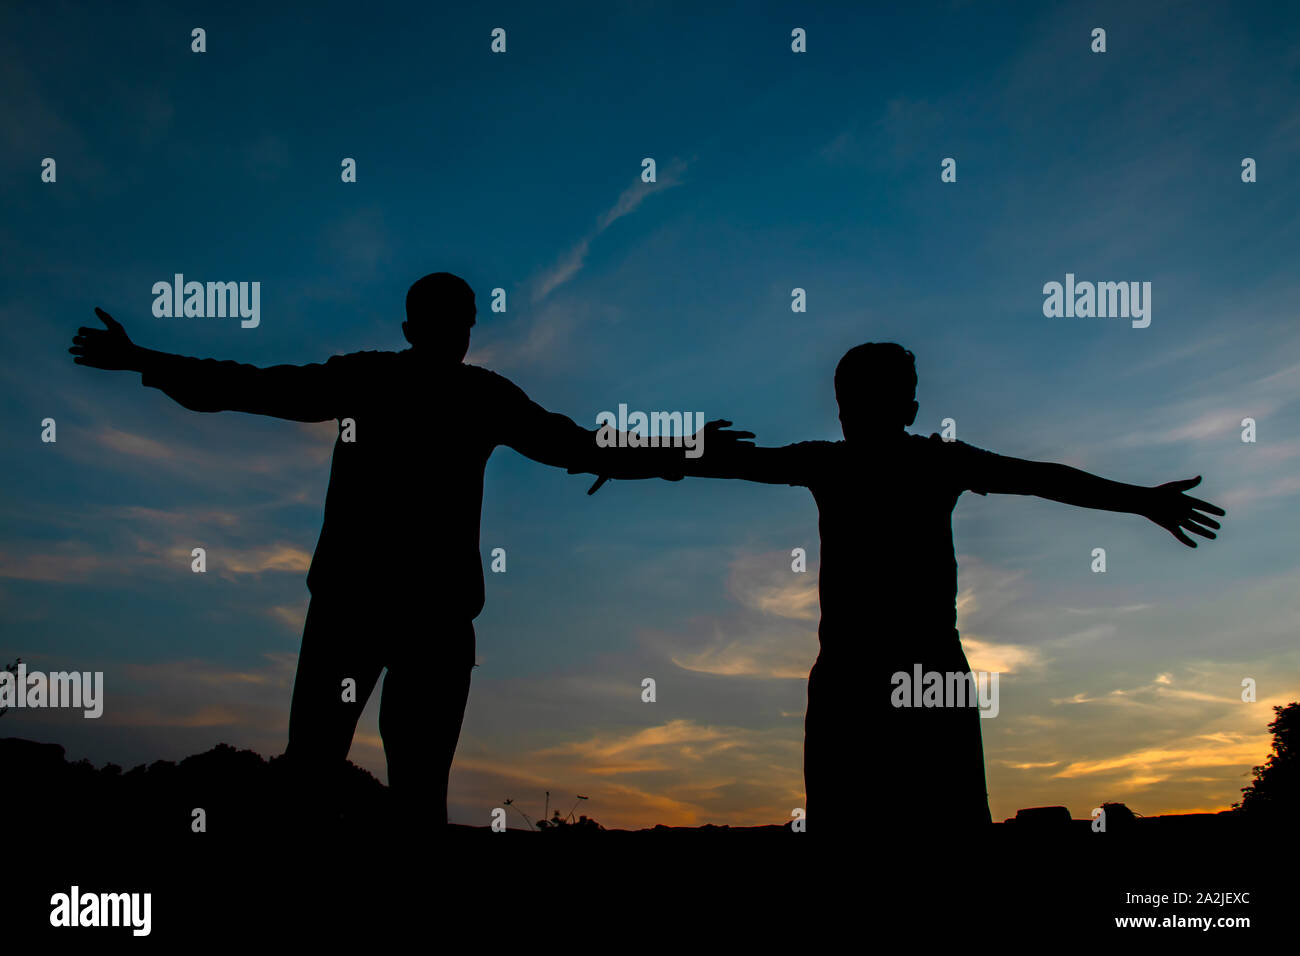 boys silhouette, over sunset sky, dark black shadow of male body with hands up, teenage boys having fun outdoor Stock Photo